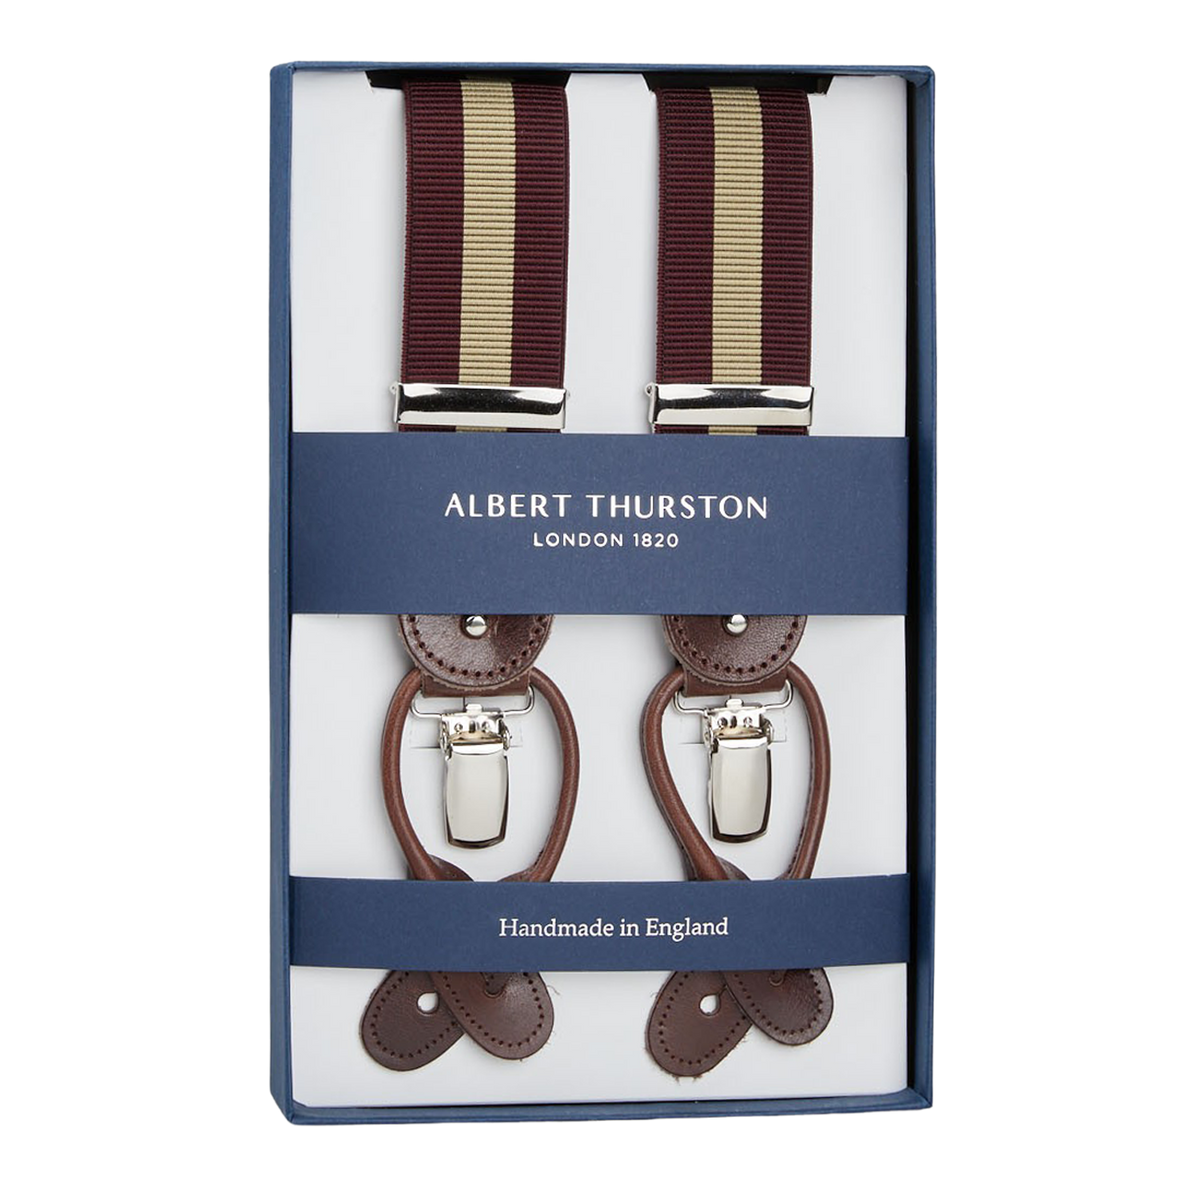 A pair of handmade brown and Burgundy-Beige Striped Nylon 35mm Braces by the British brand Albert Thurston, packaged in a box.